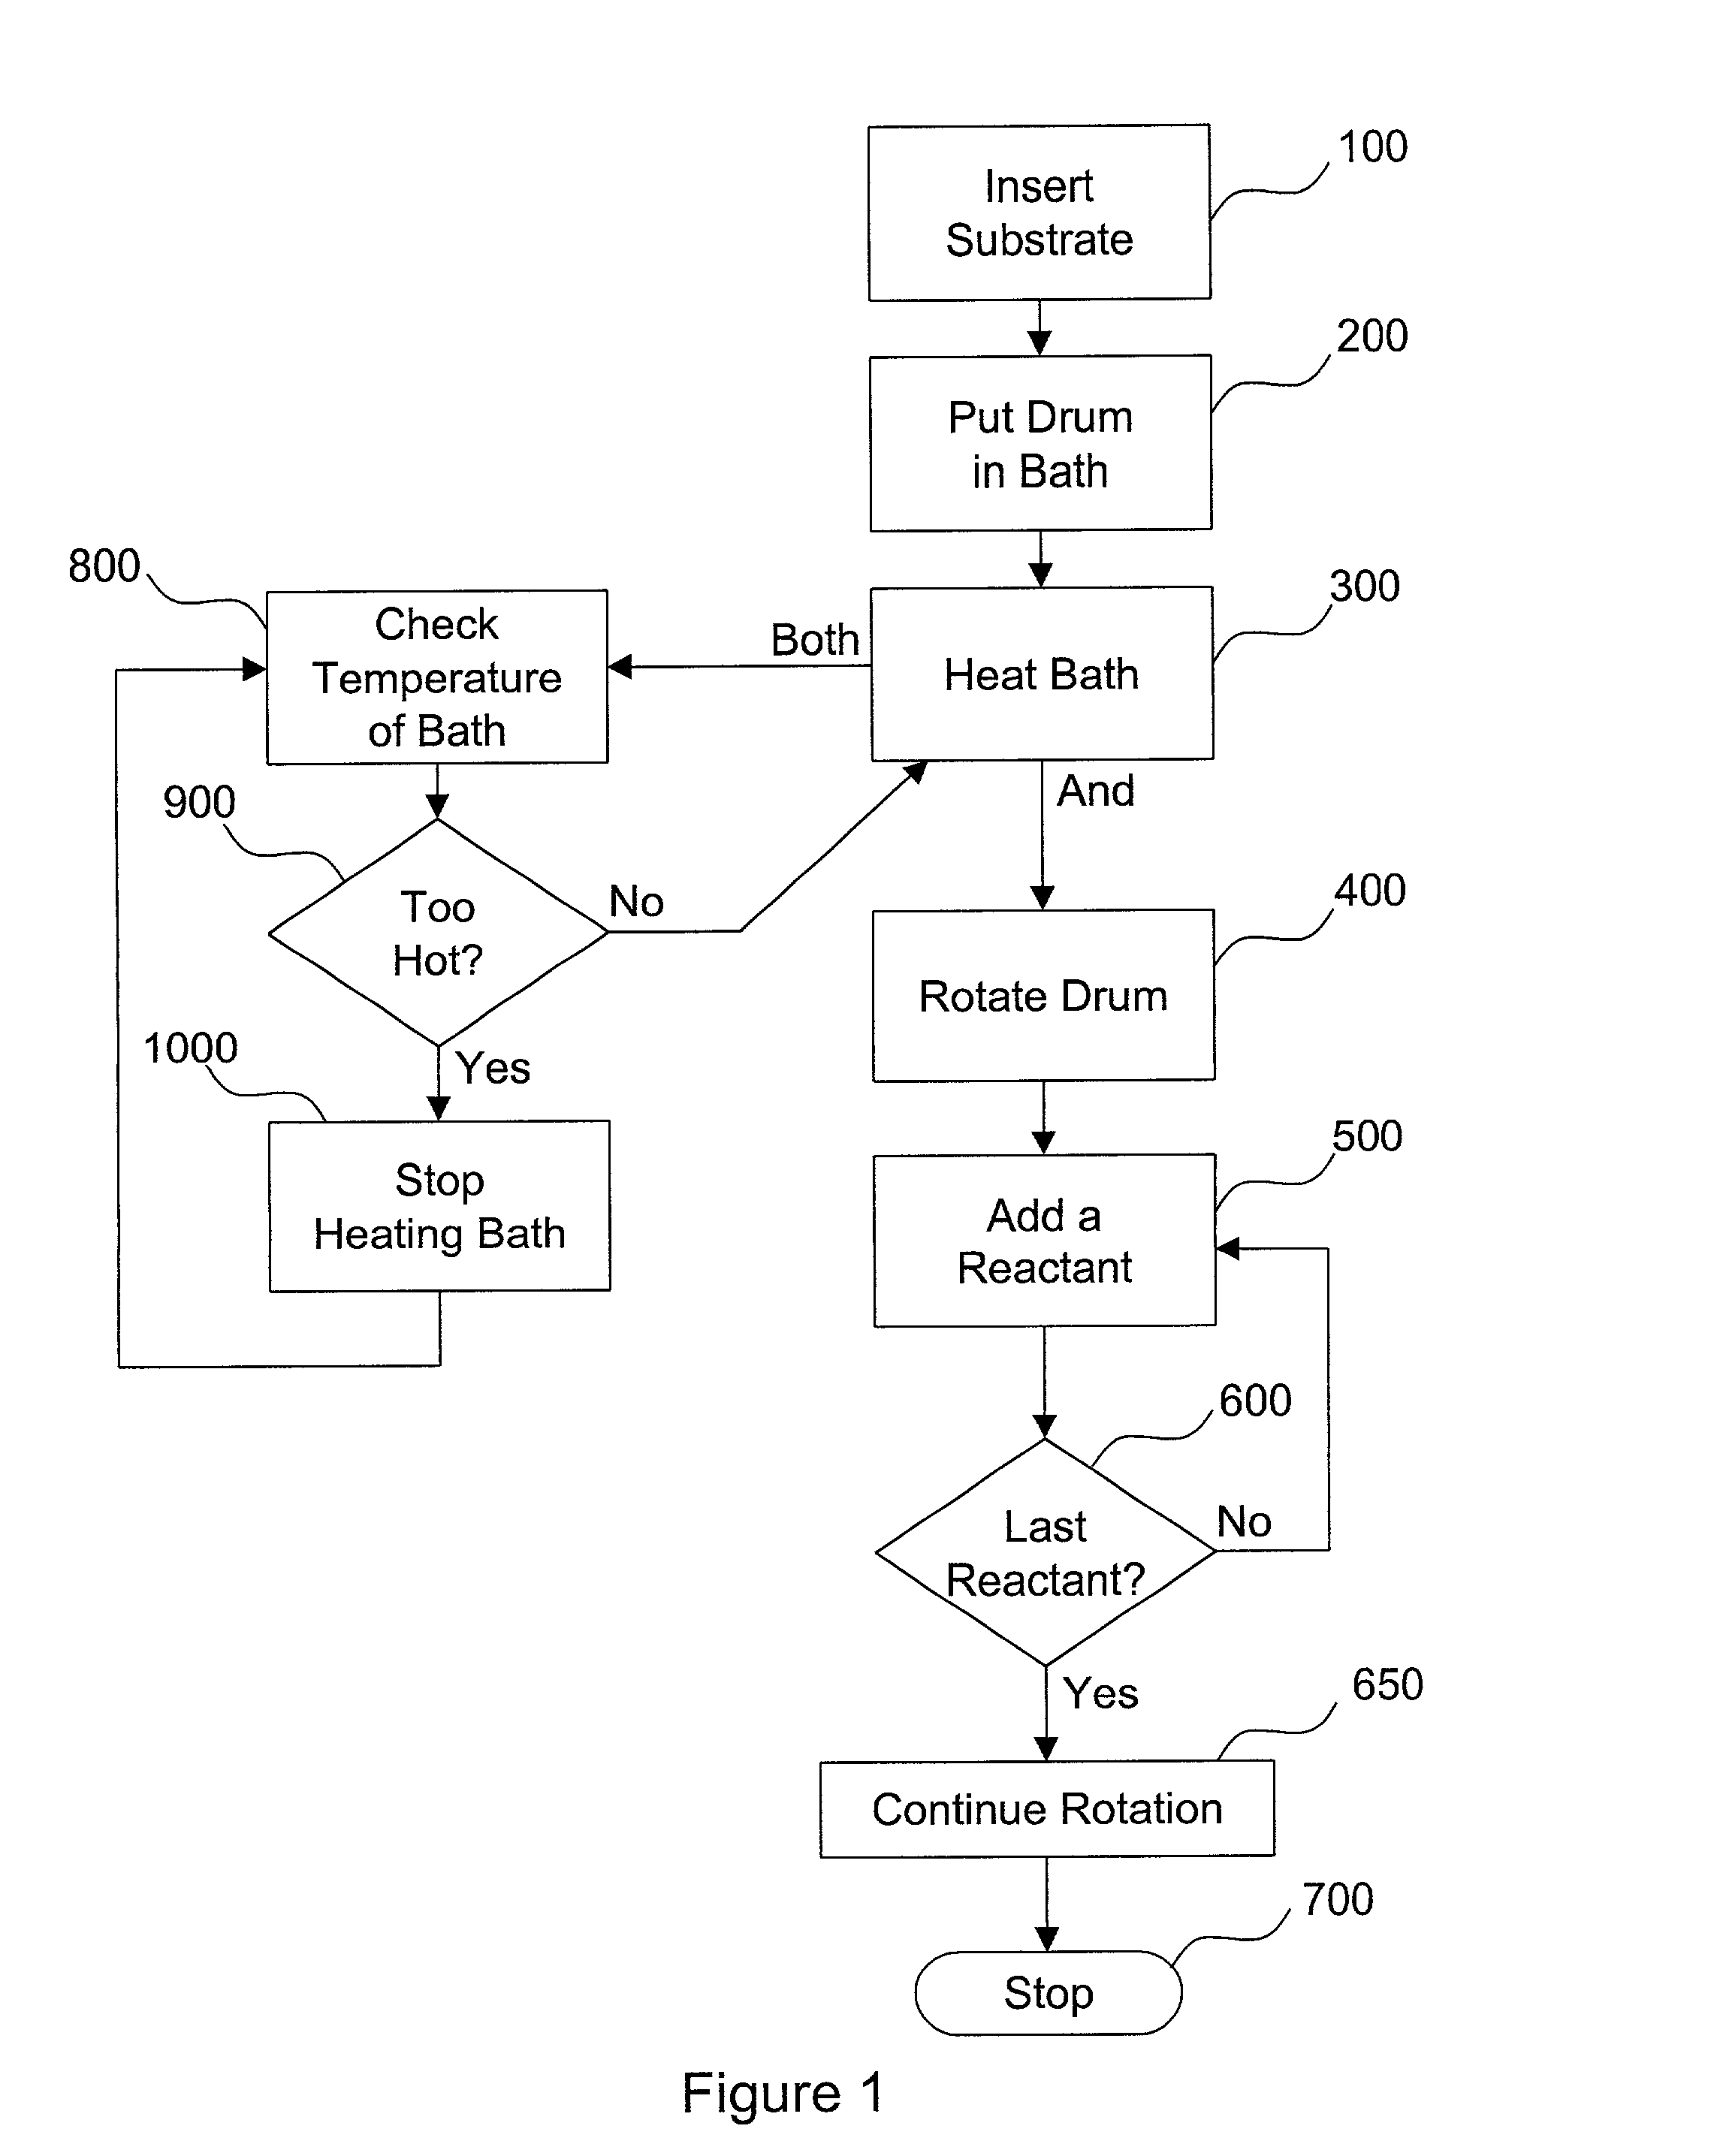 Apparatus and method for rotating drum chemical bath deposition